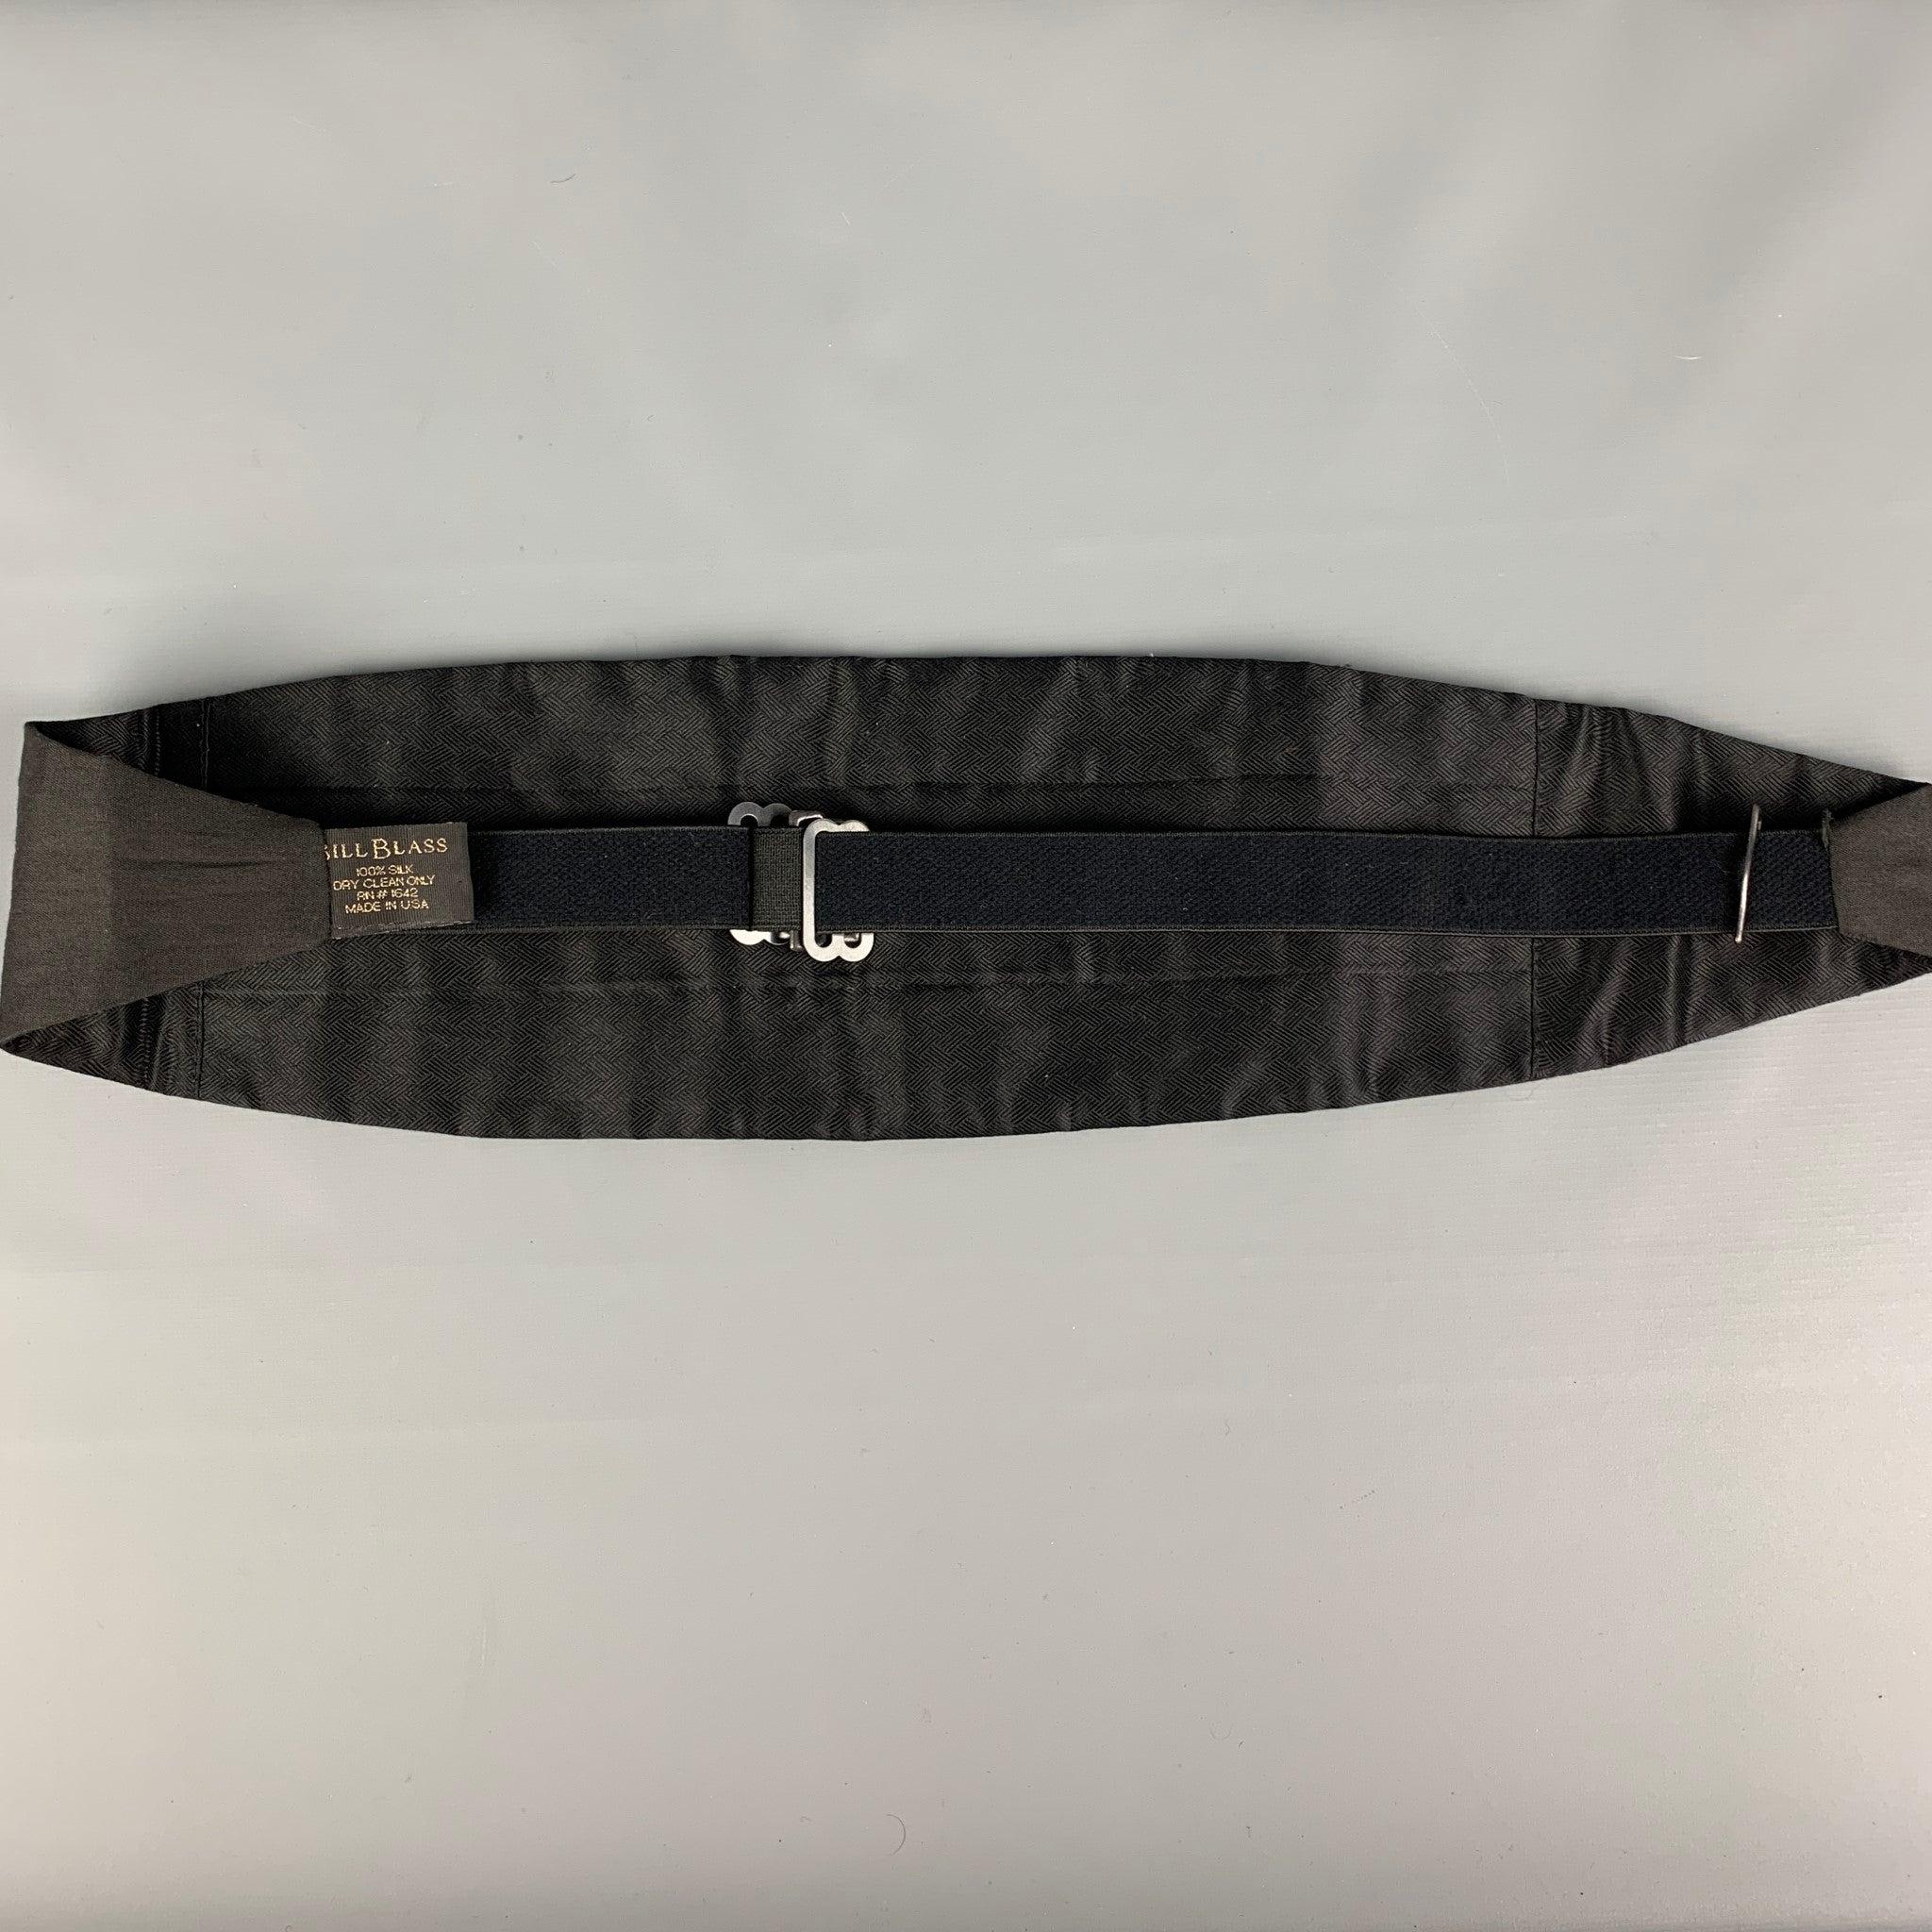 BILL BLASS
 cummerbund comes in a black silk material featuring a buckle closure. Made in USA.Very Good Pre-Owned Condition. 
 

 Measurements: 
  Height: 5 inches Length: 40.5 inches 
  
  
  
 Sui Generis Reference: 118686
 Category: Cummerbund
